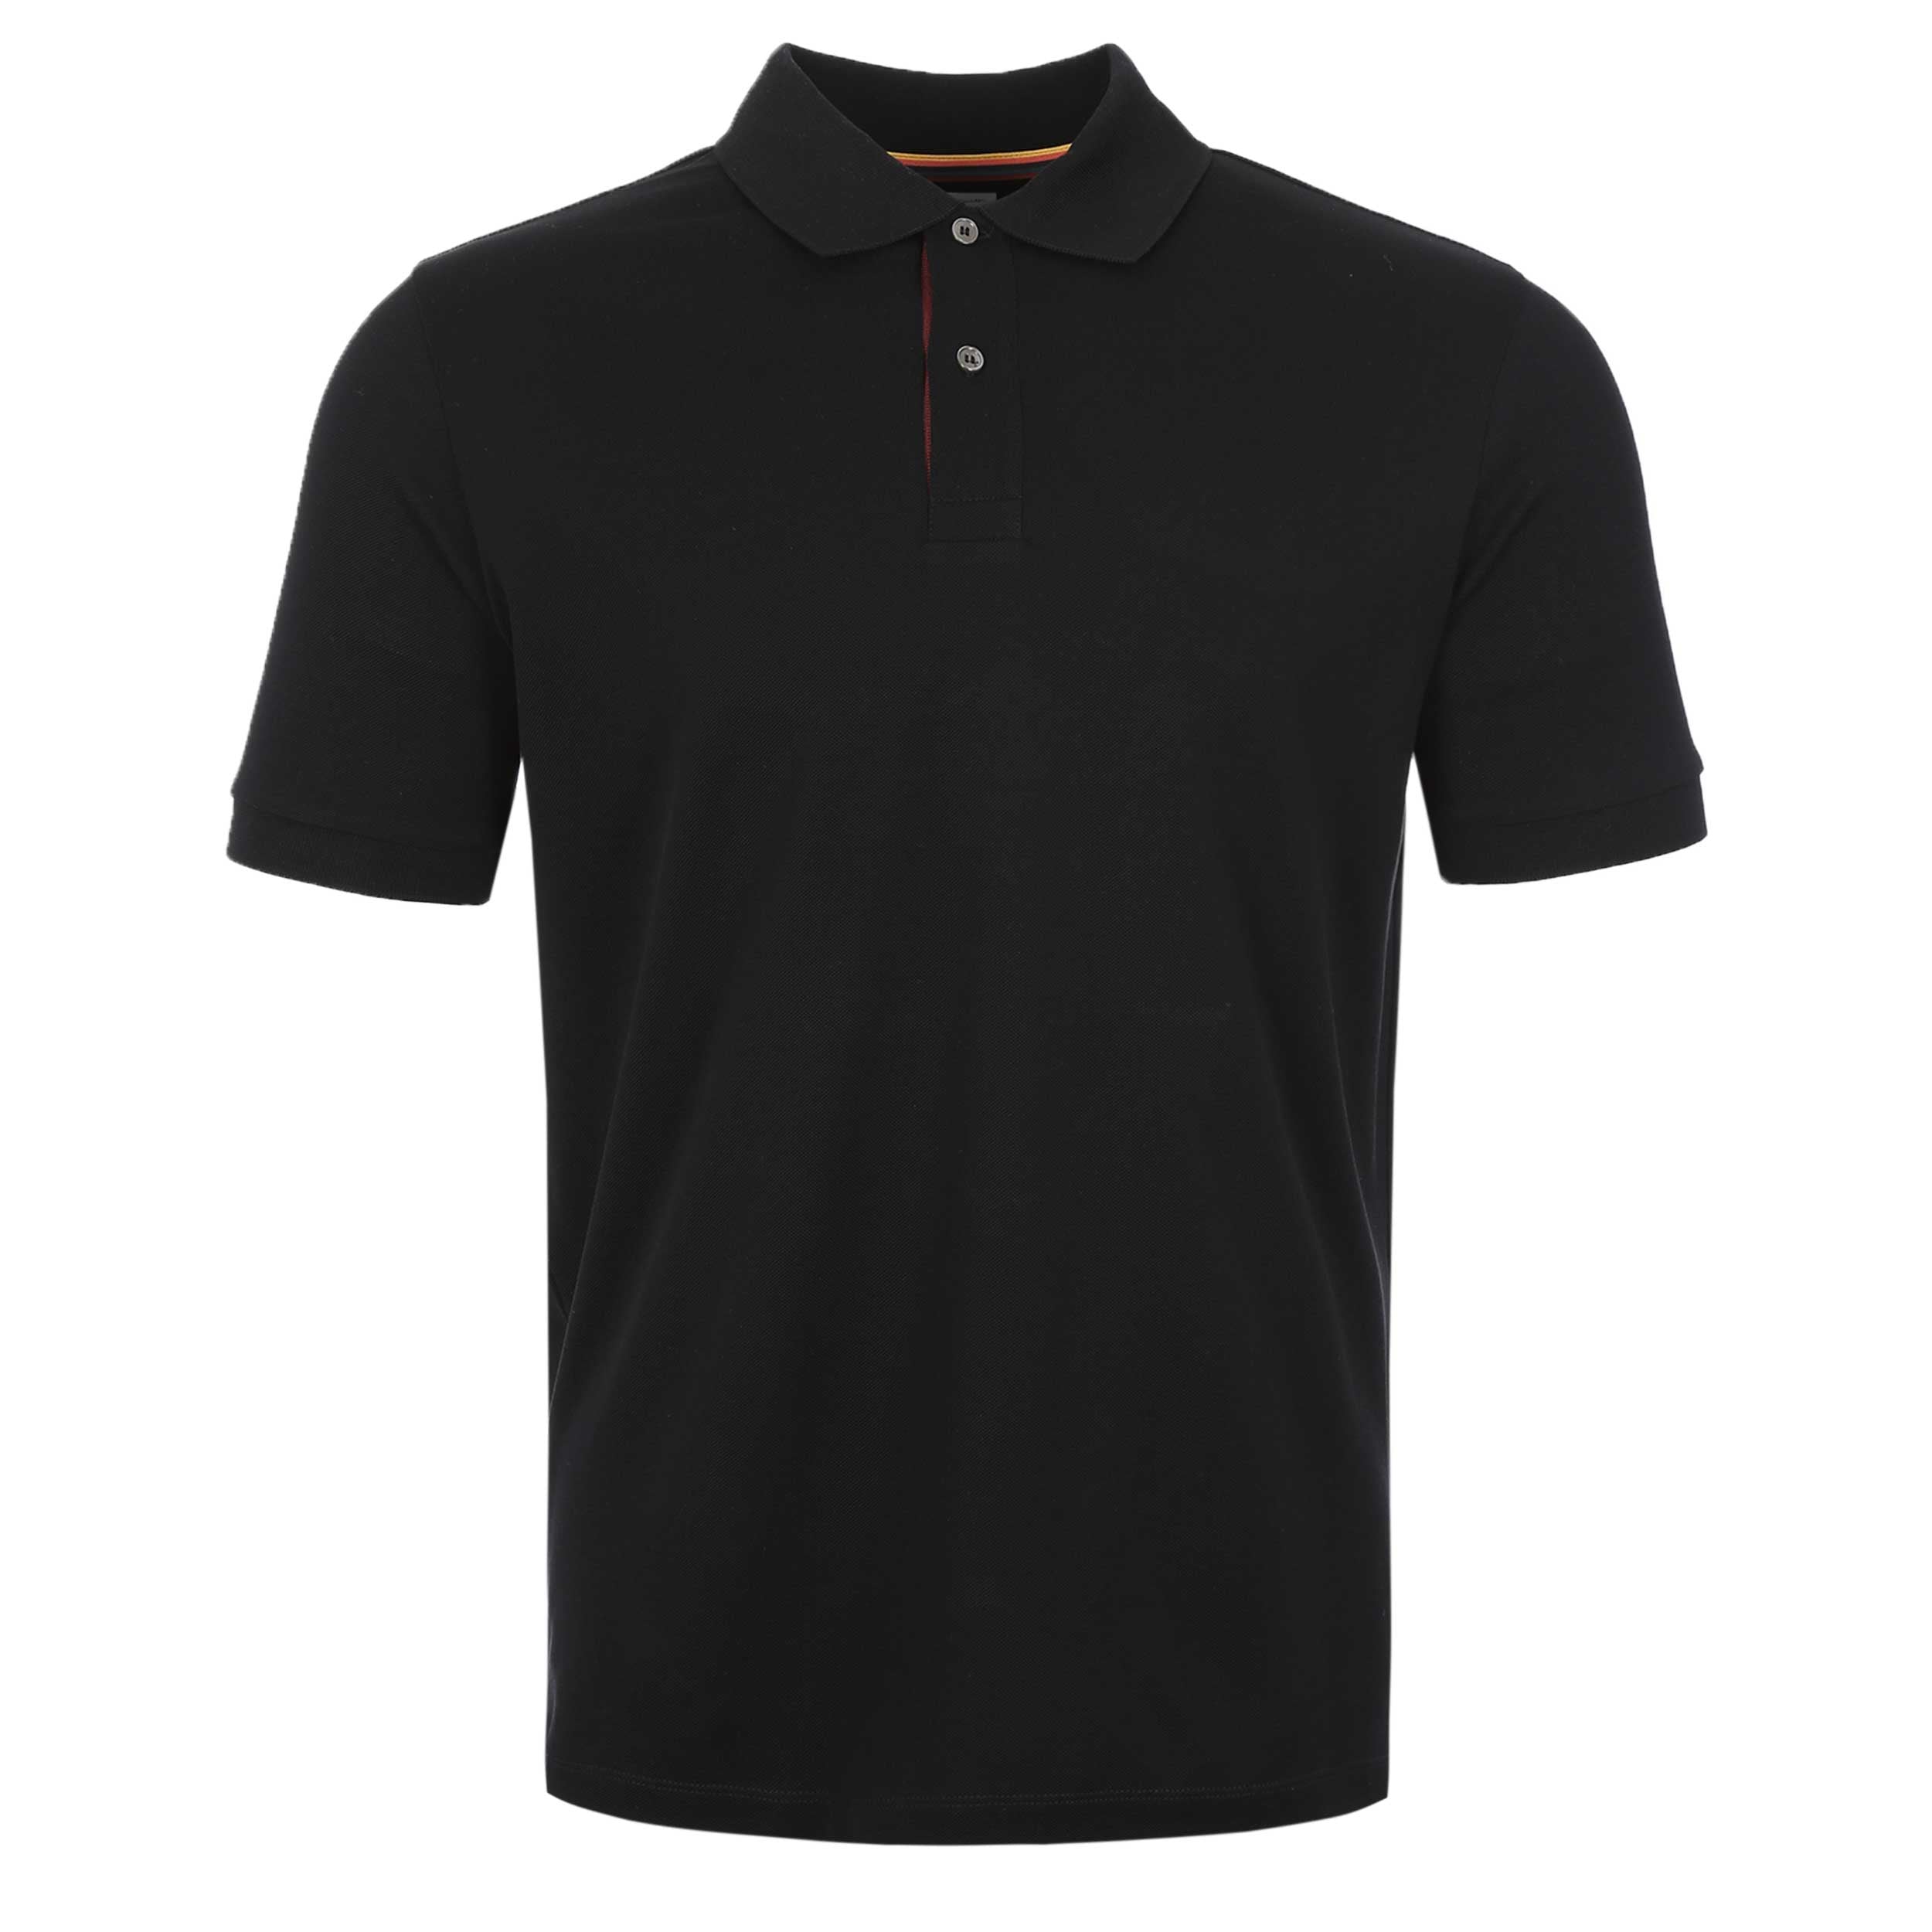 Paul Smith Placket Polo Shirt in Black